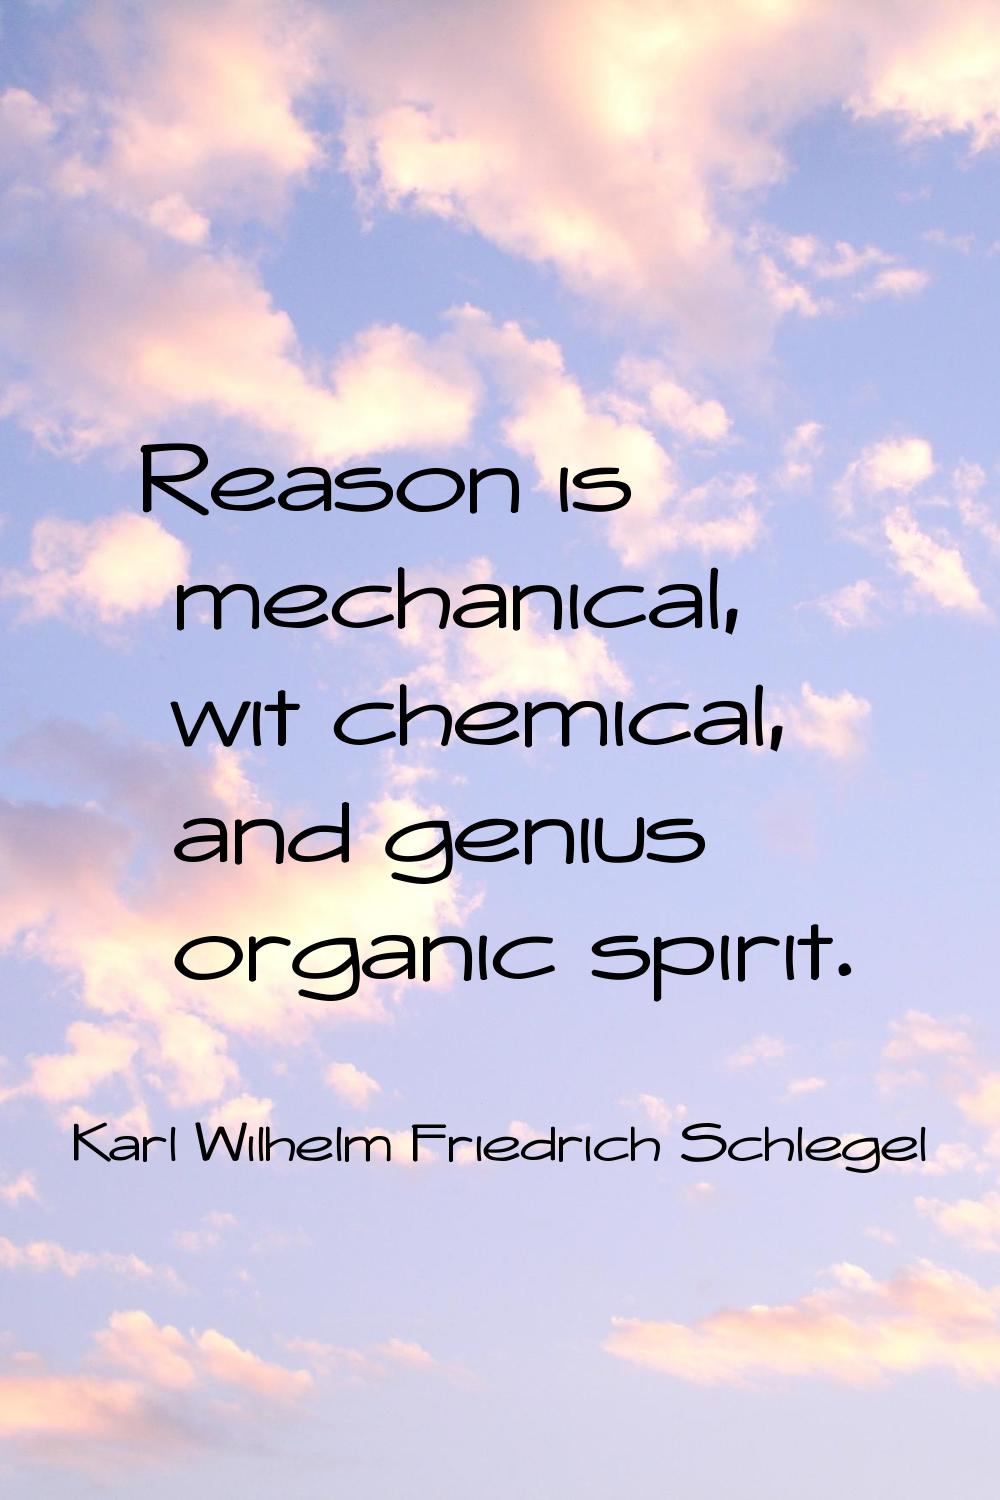 Reason is mechanical, wit chemical, and genius organic spirit.